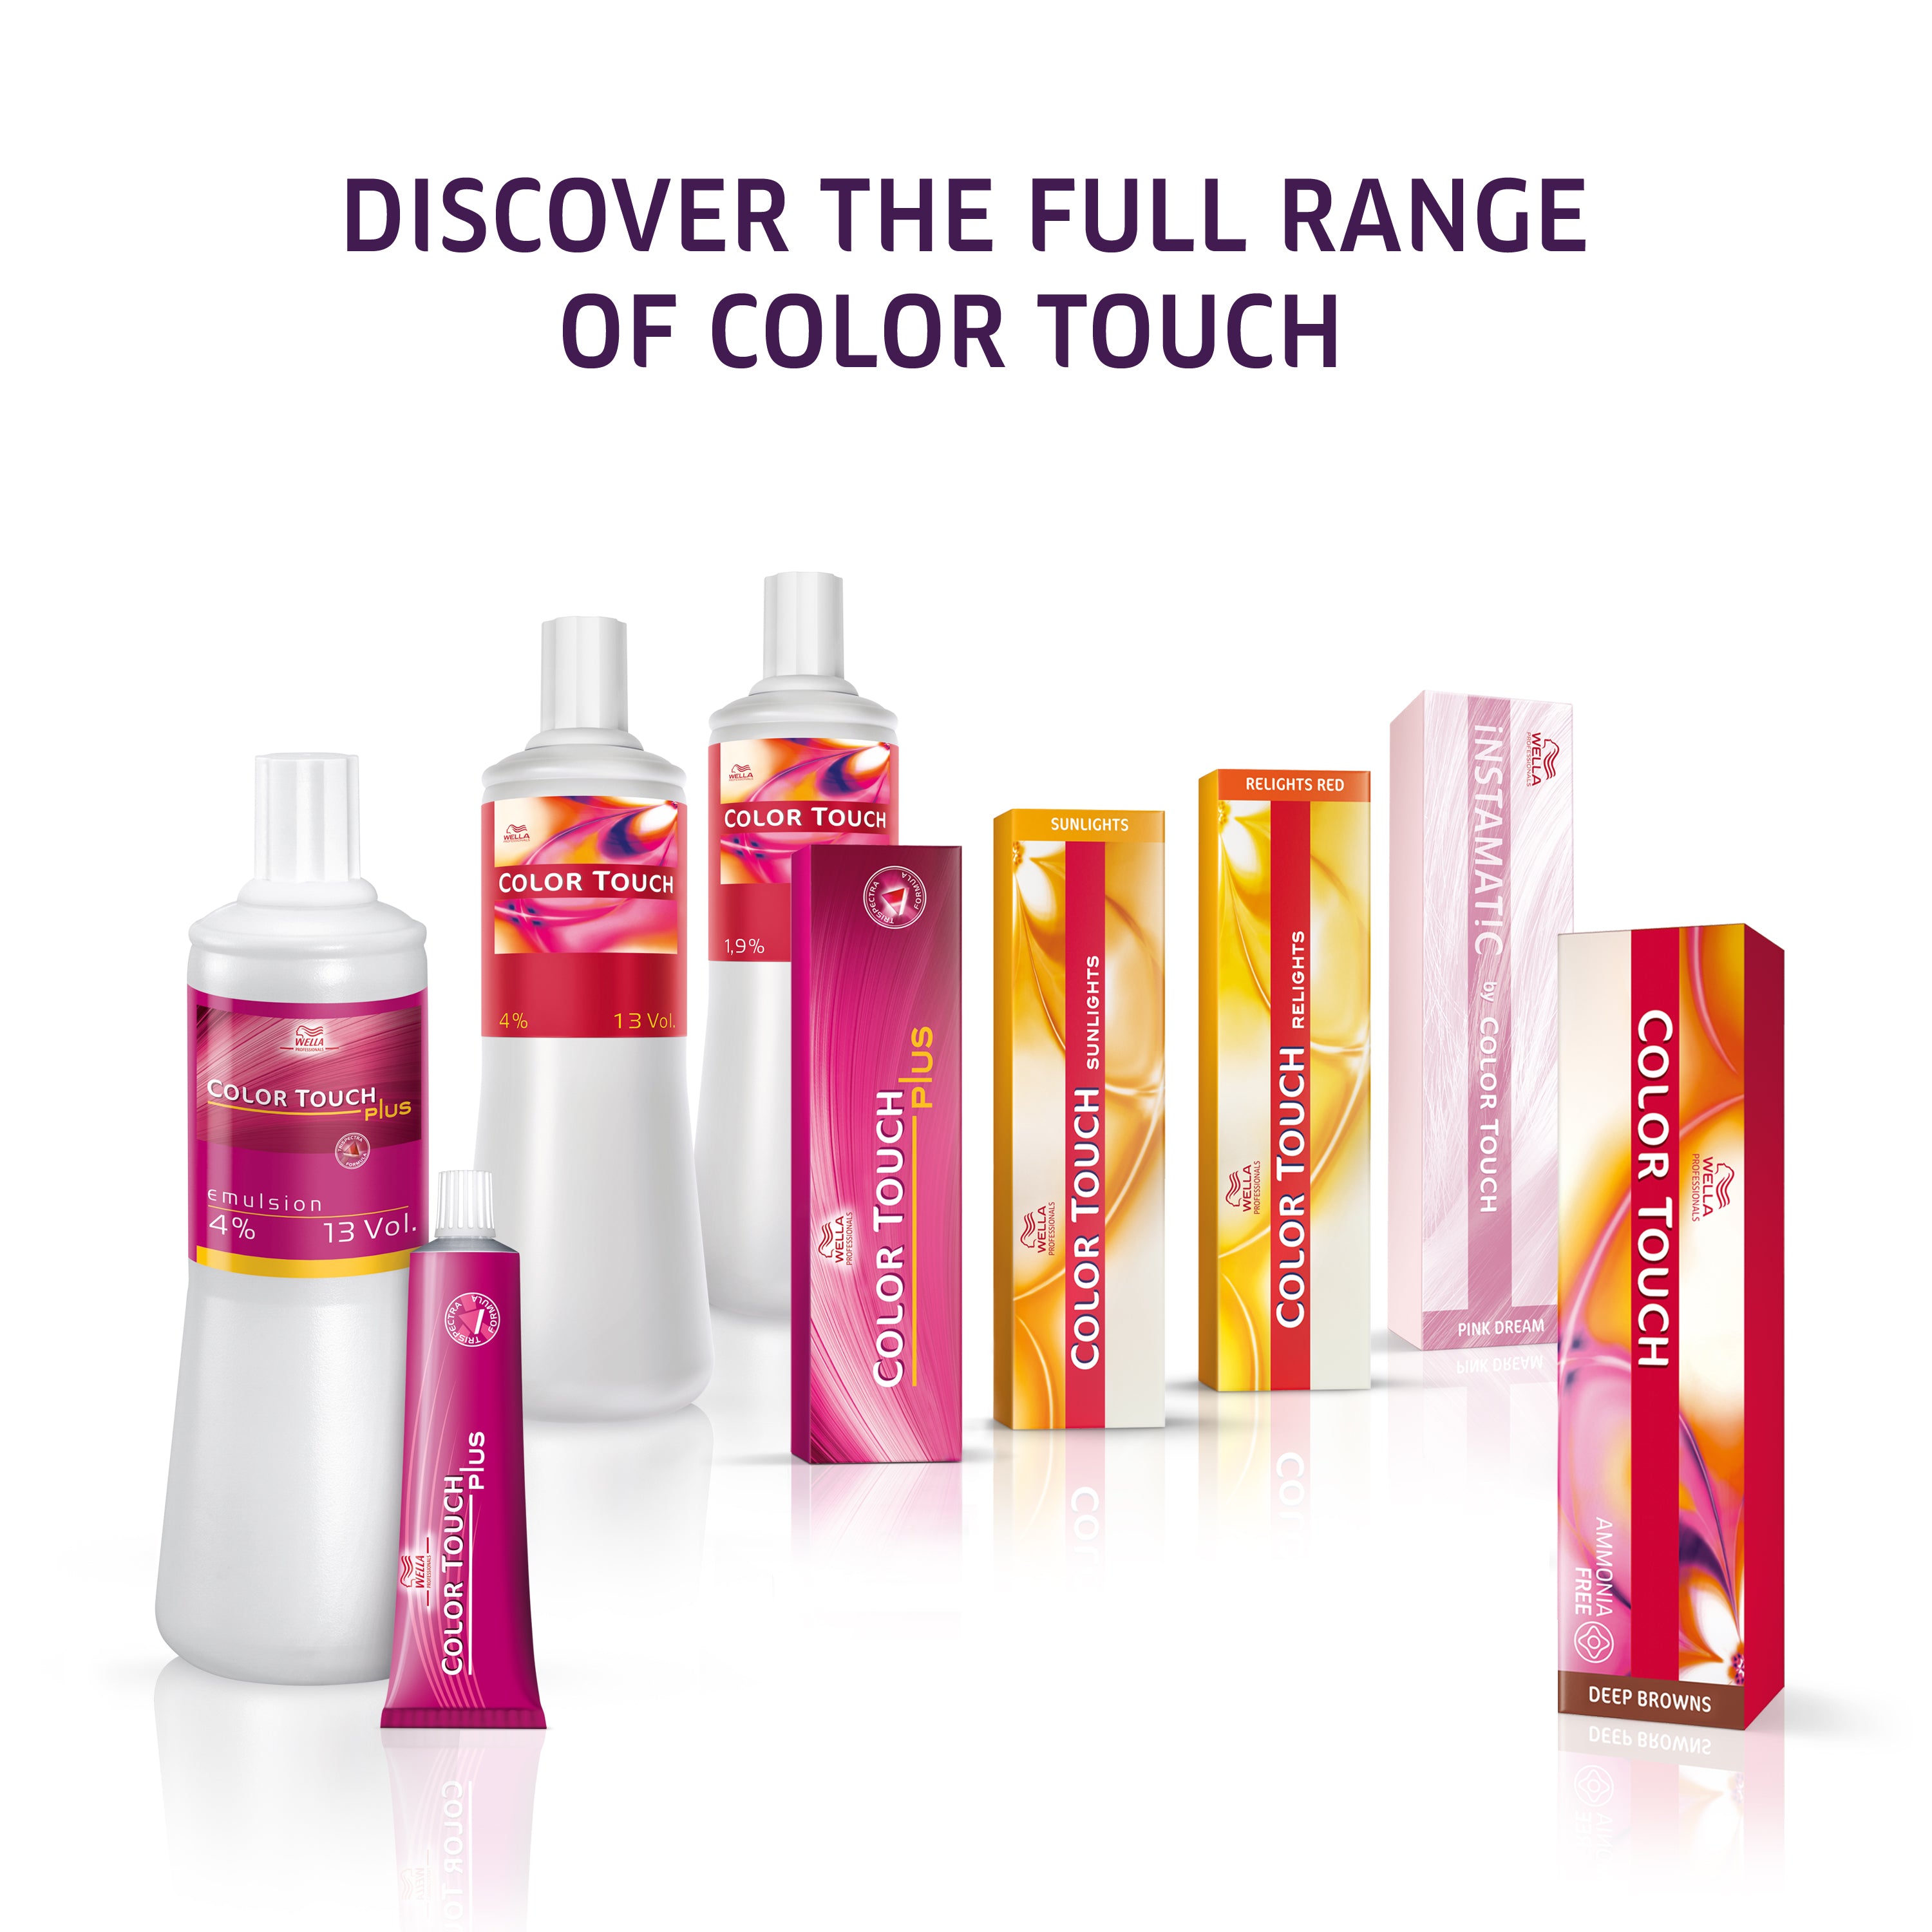 Wella Professional Color Touch Emulsion 4% 1000 ml